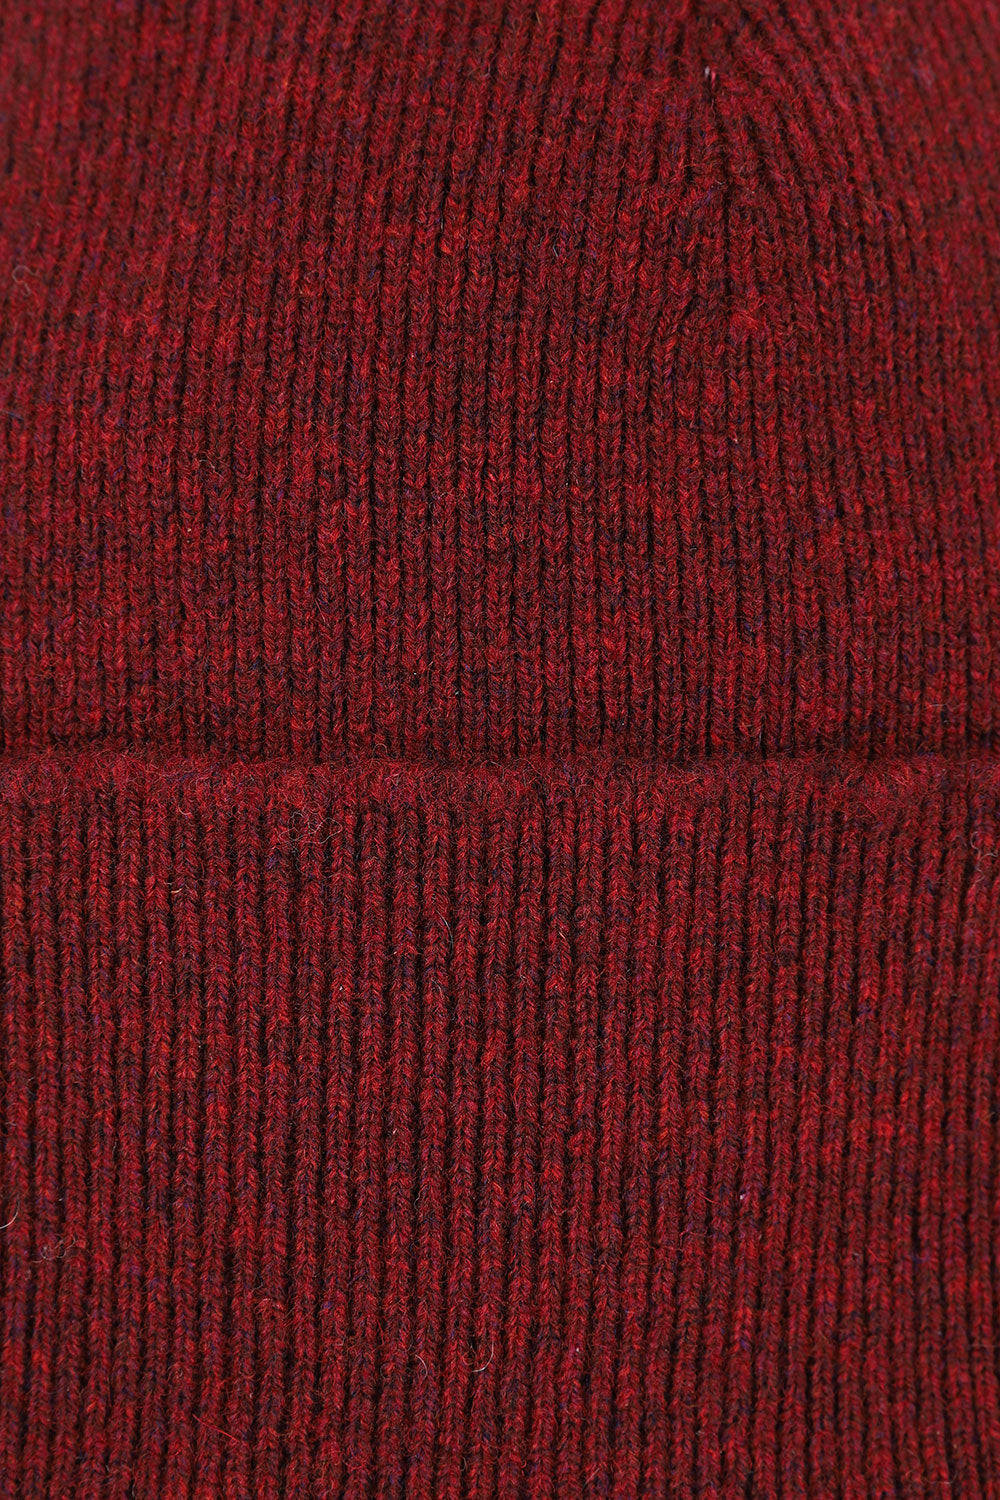 Close-up view of Uskees 4004 red wool hat, showing the texture of the natural lambswool.